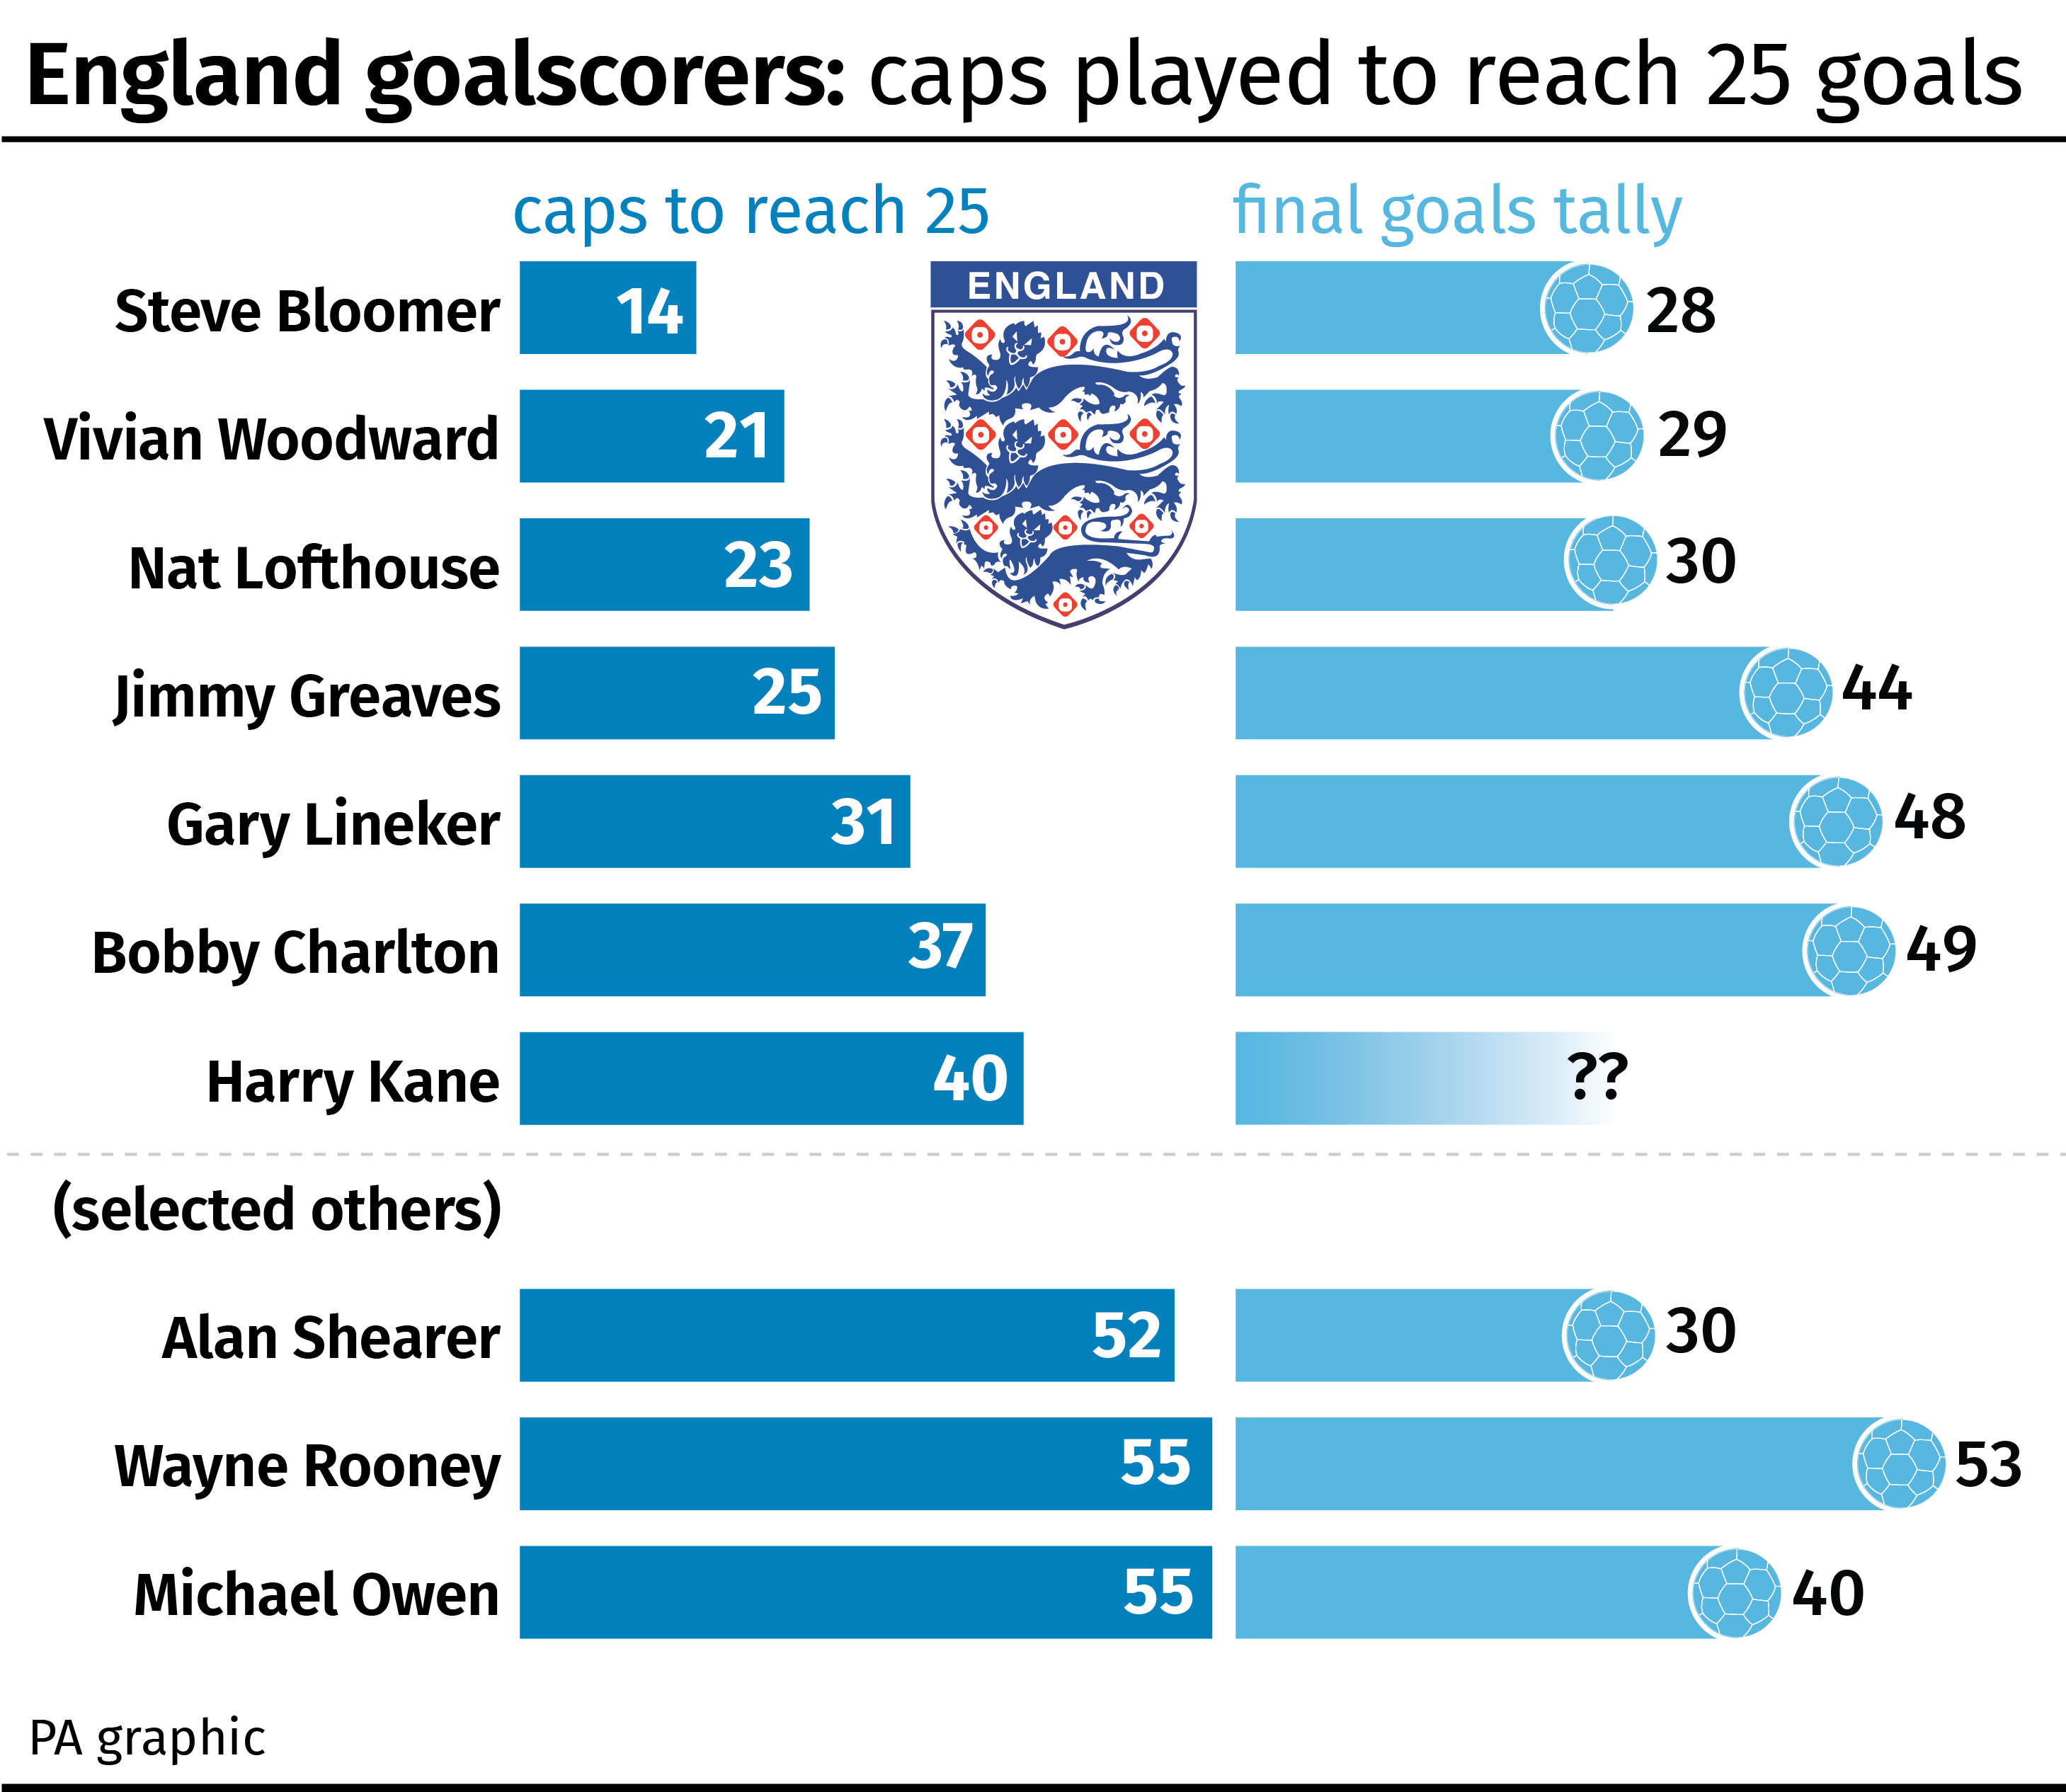 A look at the players who reached 25 England goals in the shortest time